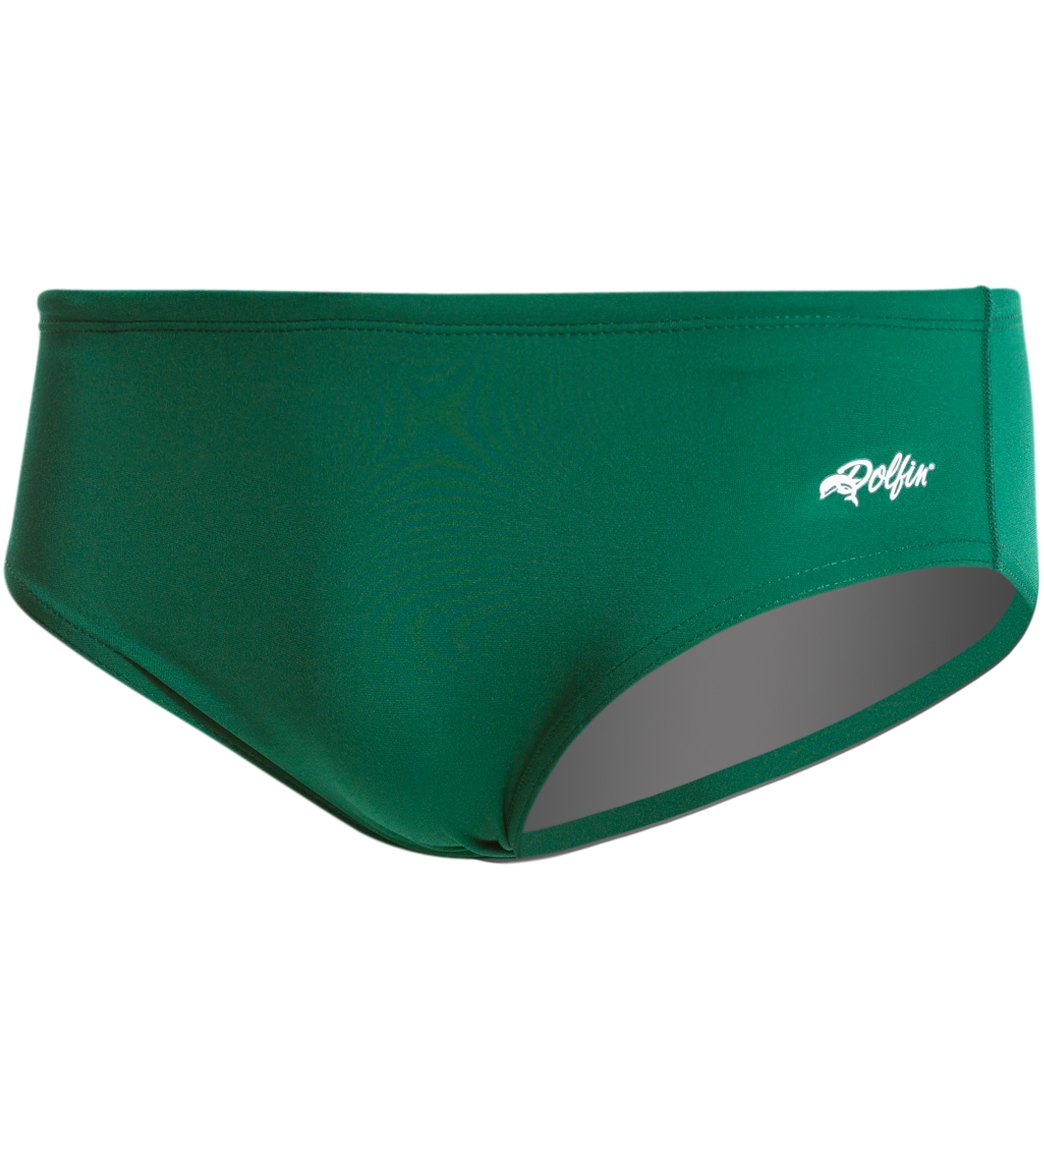 Dolfin Competition All Poly Solid Mens Racer Briefs Brief Swimsuit - Forest Green 24 Polyester - Swimoutlet.com